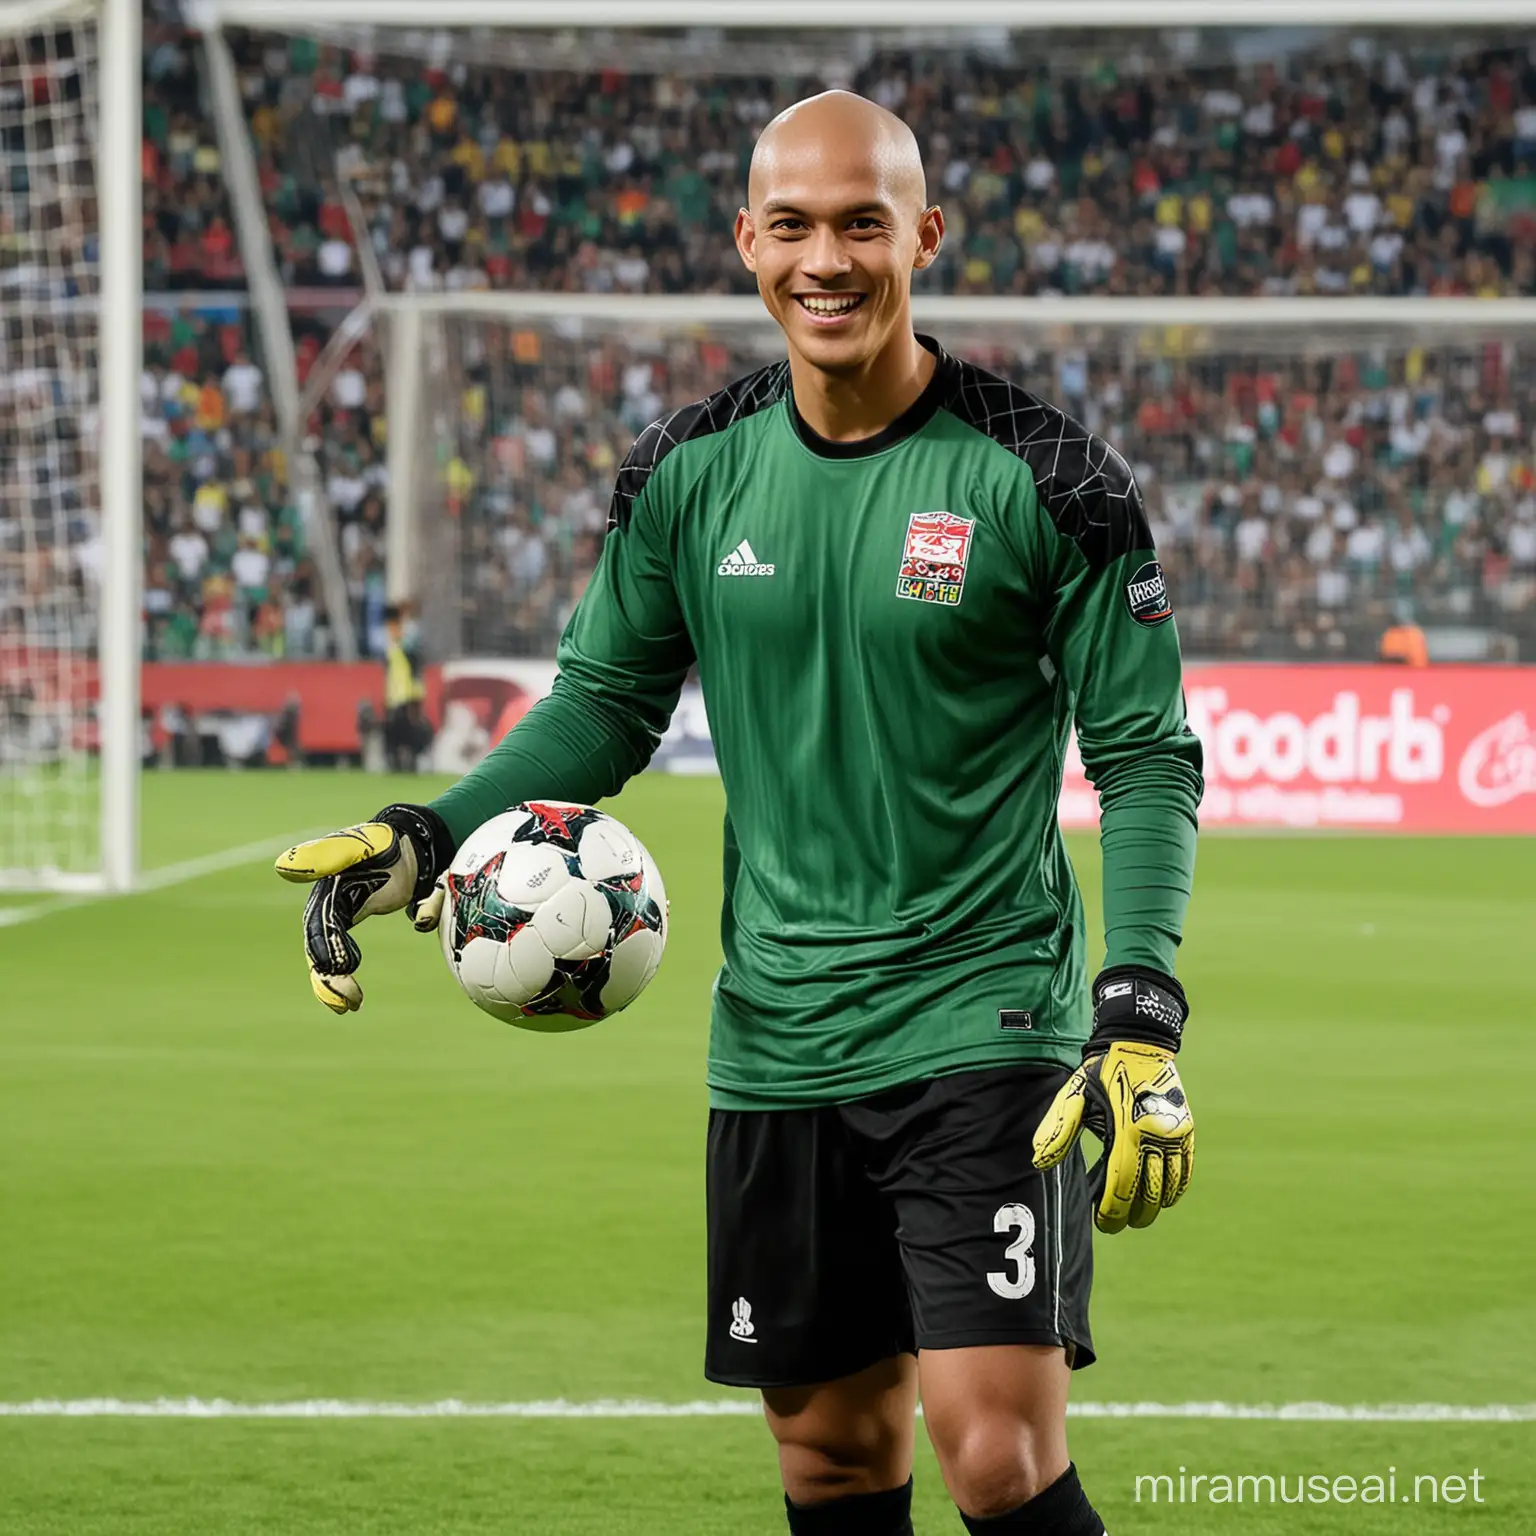 photo of a soccer goalkeeper from Indonesia with bald hair, wearing a green long-sleeved shirt, wearing goalkeeper gloves, black socks, black soccer shoes, holding the ball while smiling faintly, background of a soccer stadium field